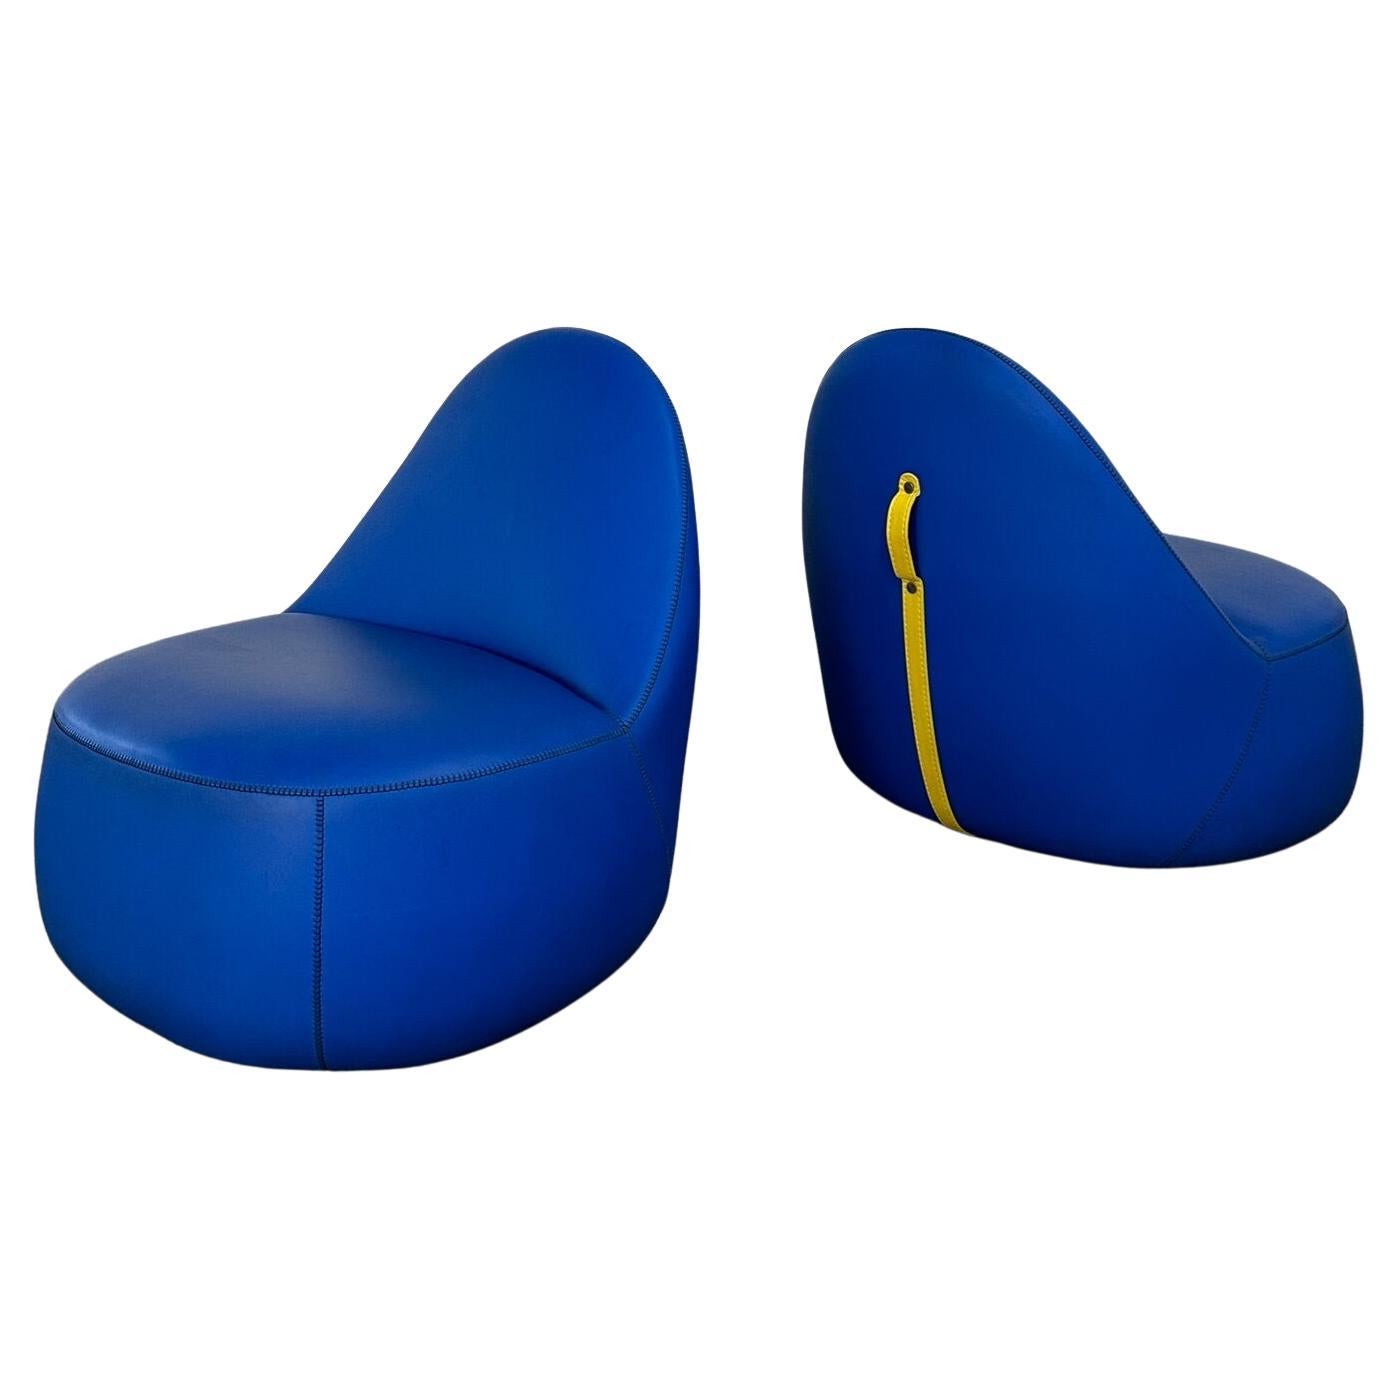 Mitt Lounge Chairs in Blue with Yellow Accents by Claudia + Harry Washington, Be